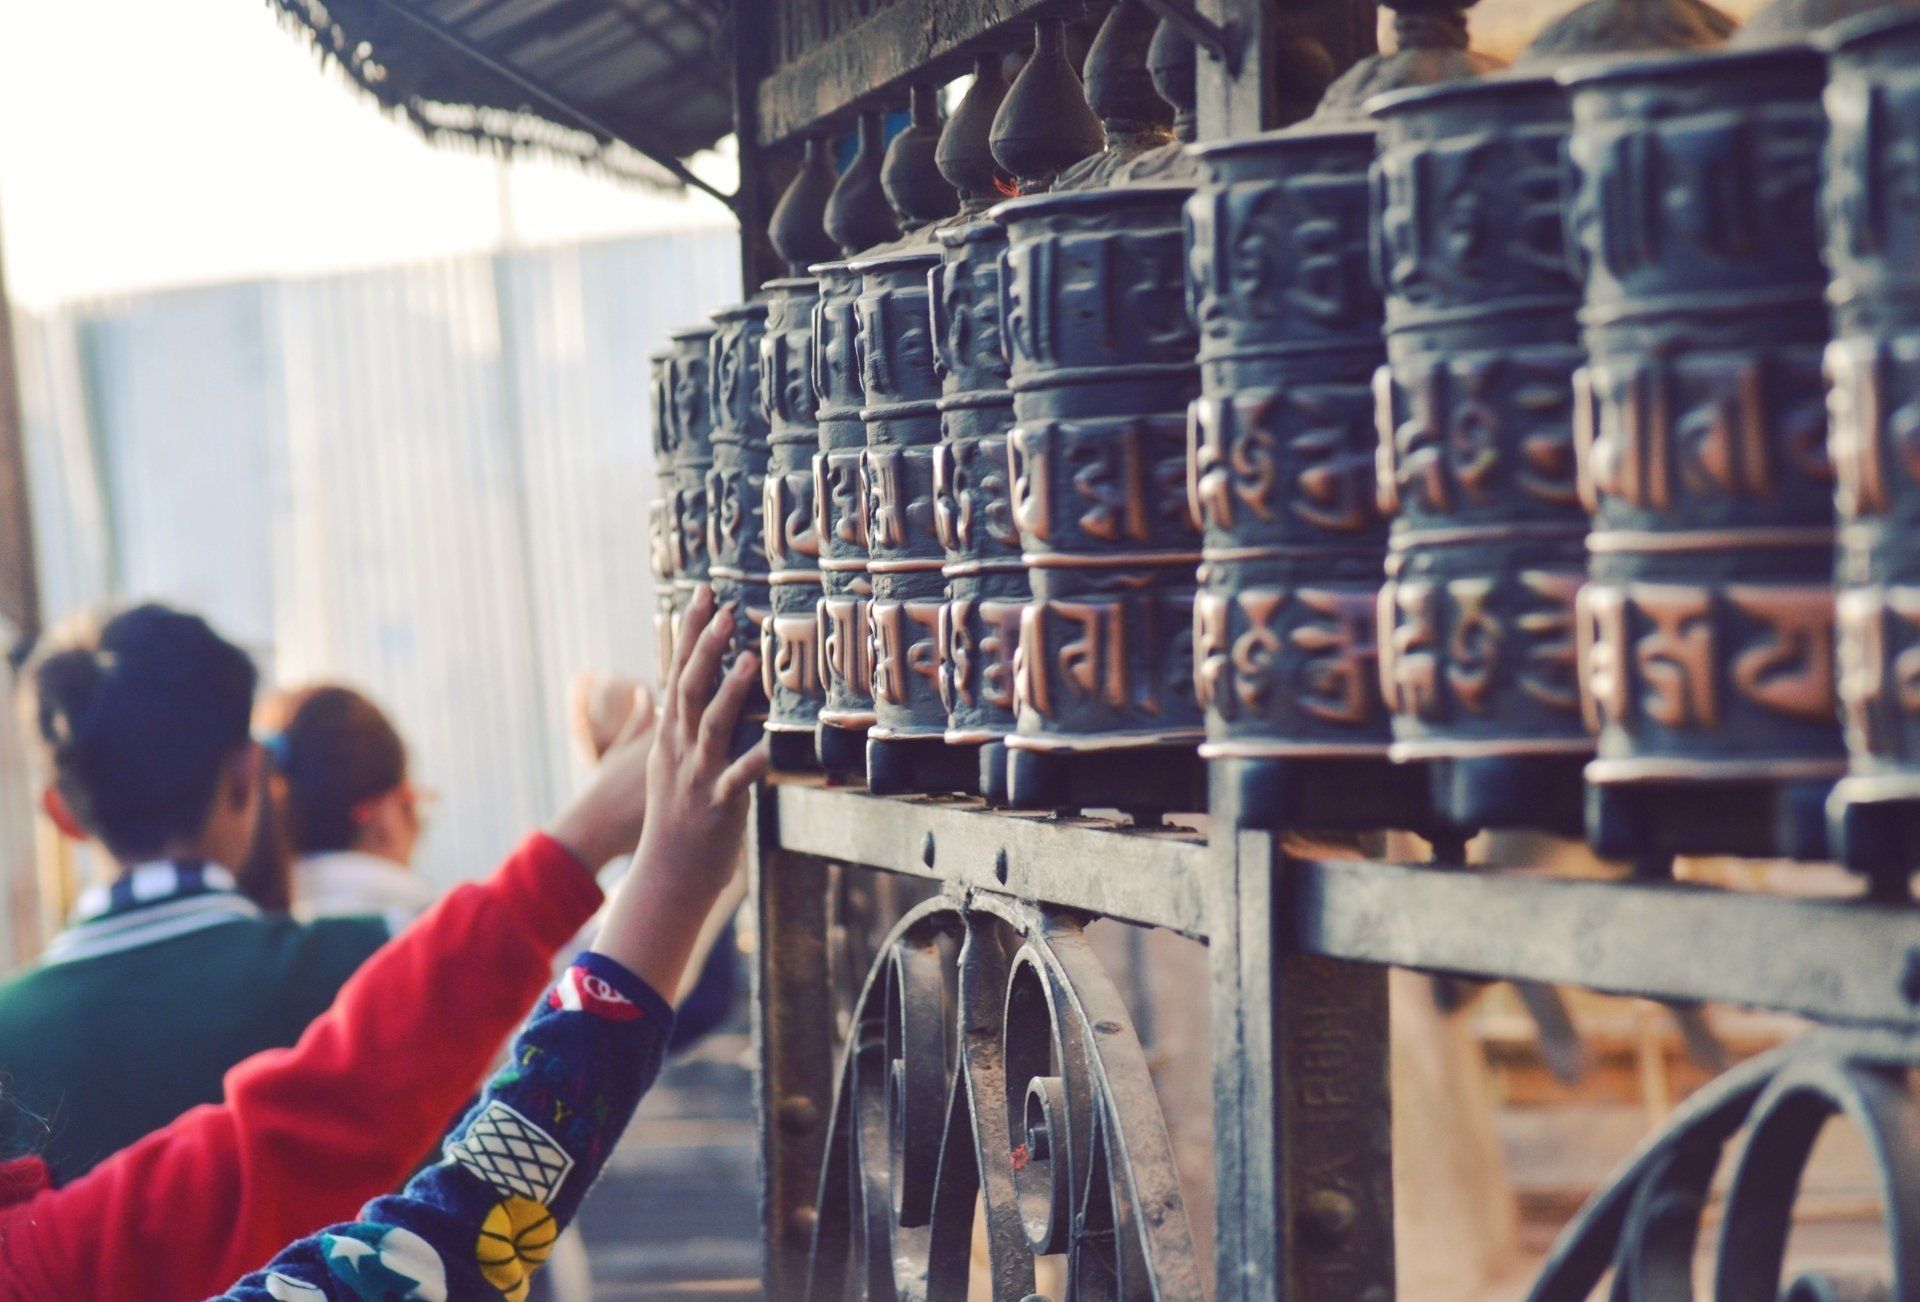 A person is praying in front of a row of prayer wheels.